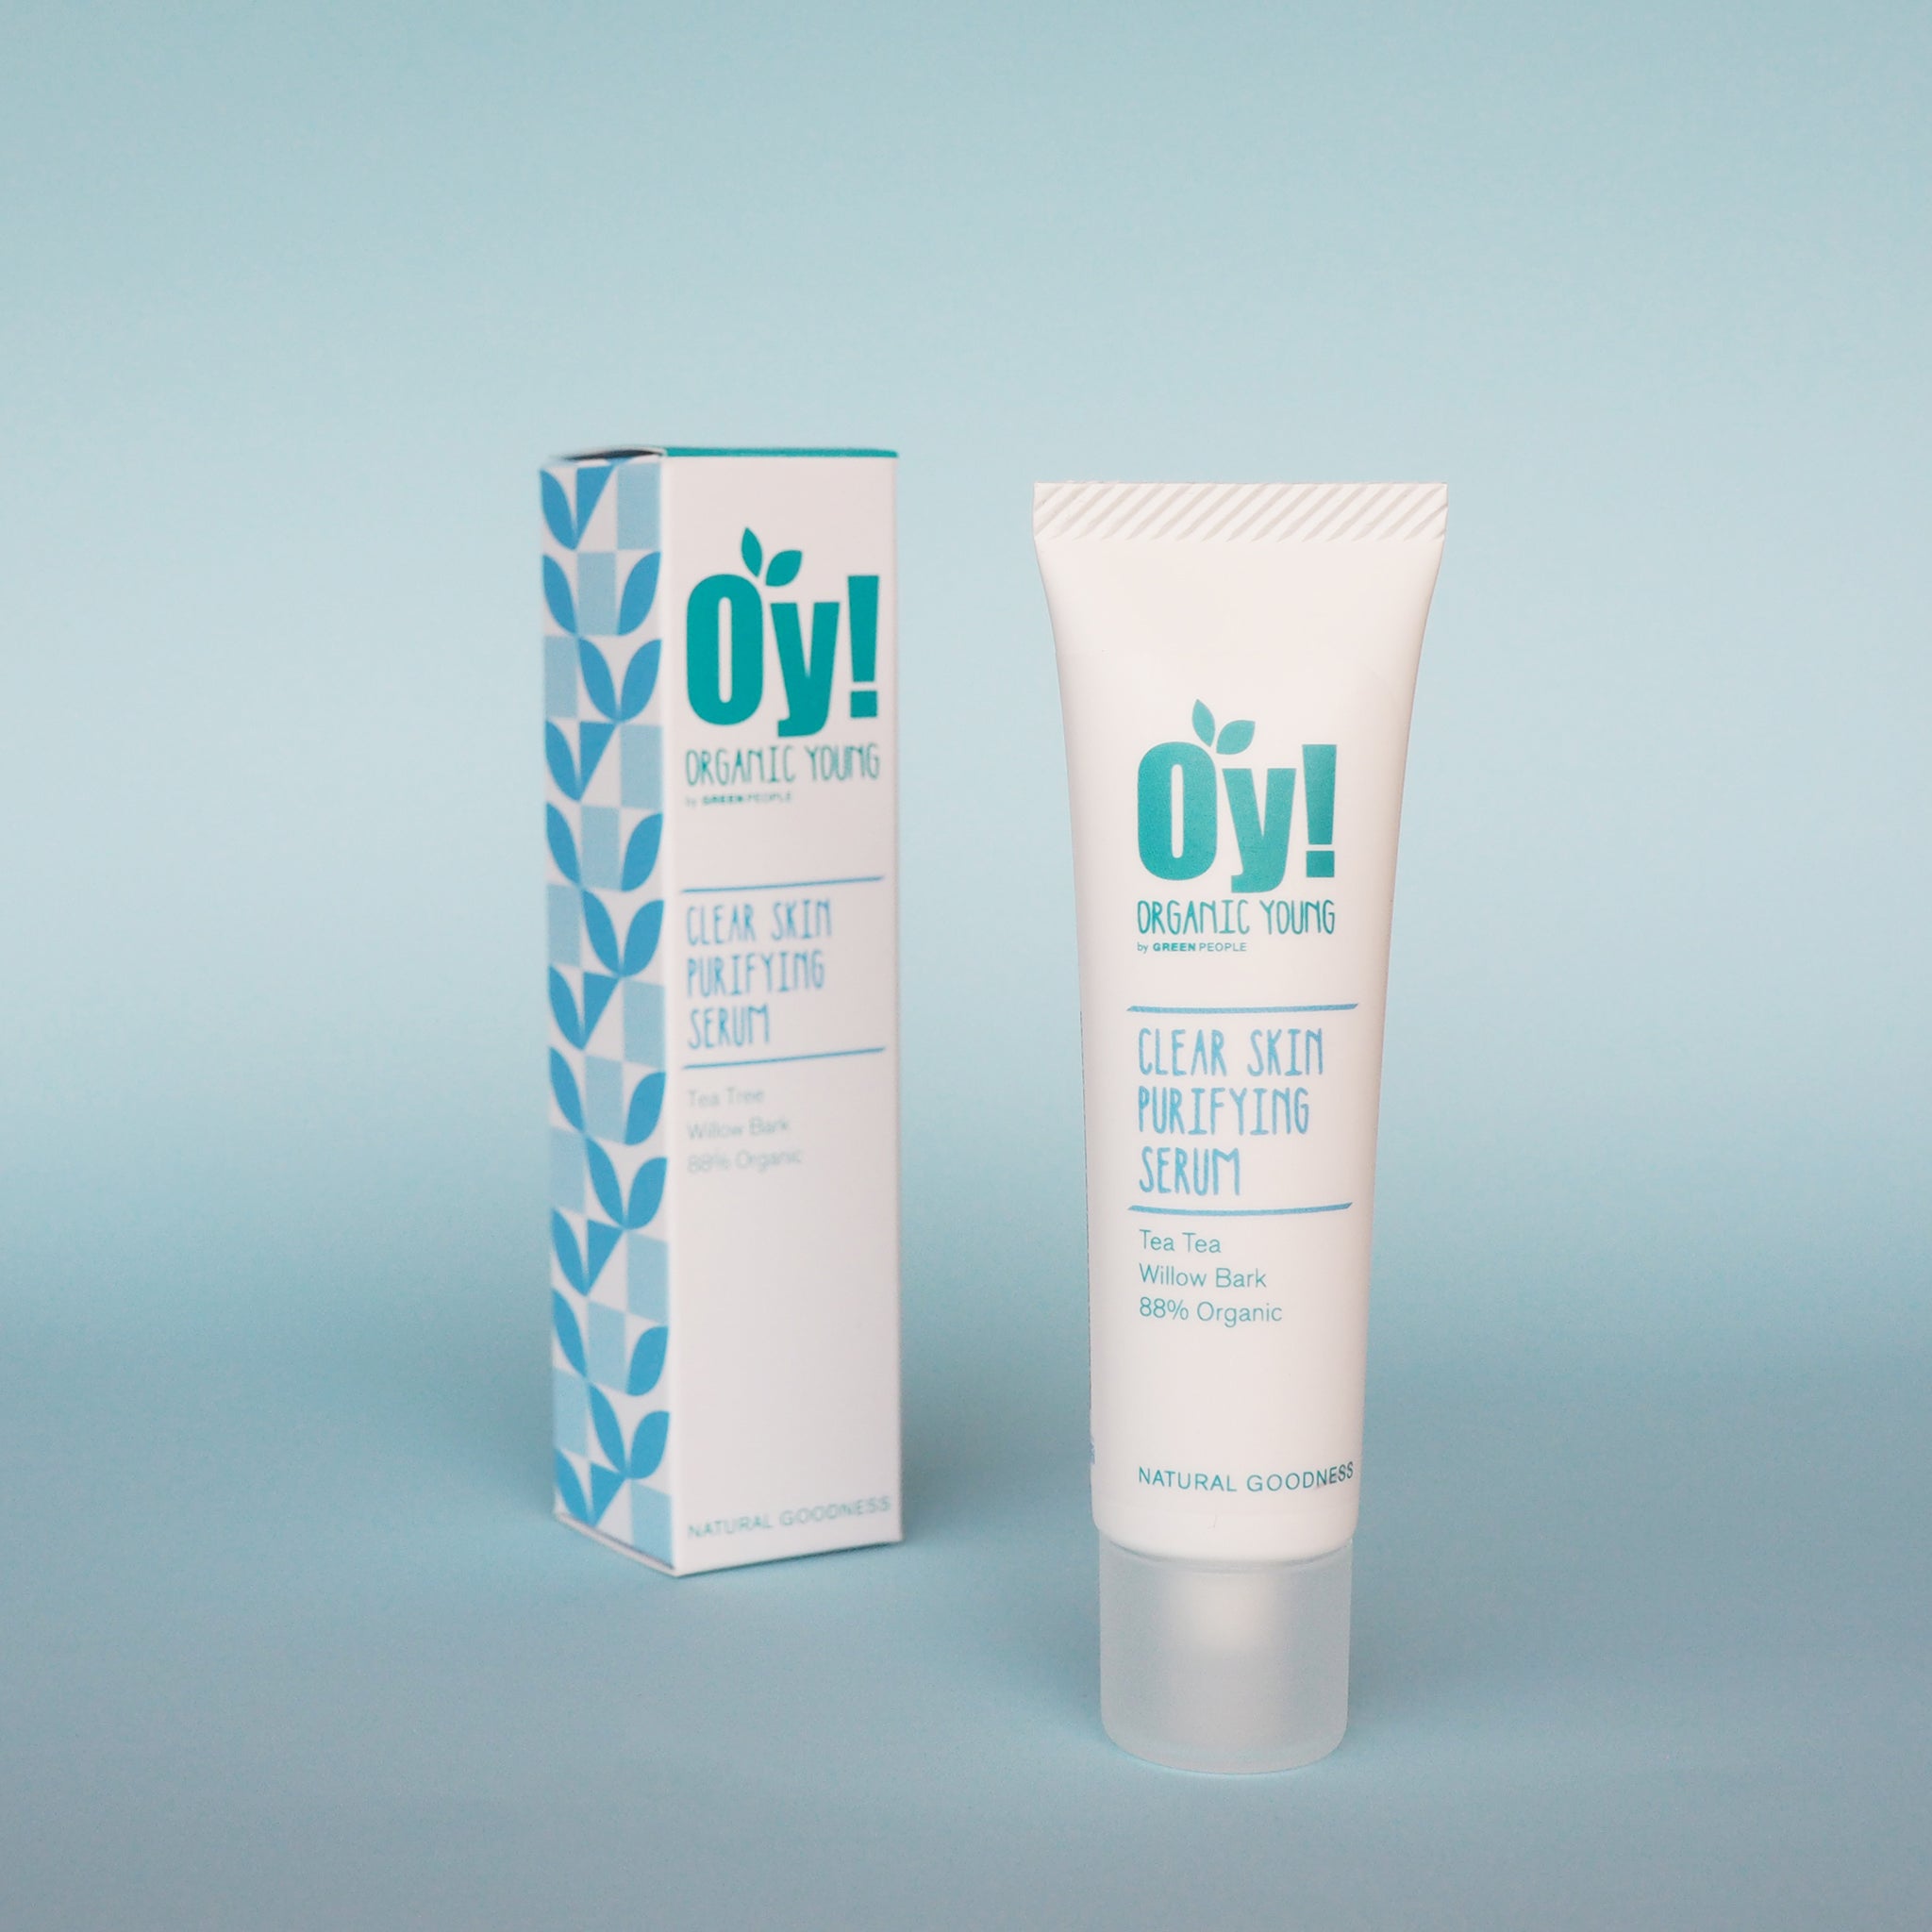 OY! Clear Skin Purifying Serum - mypure.co.uk